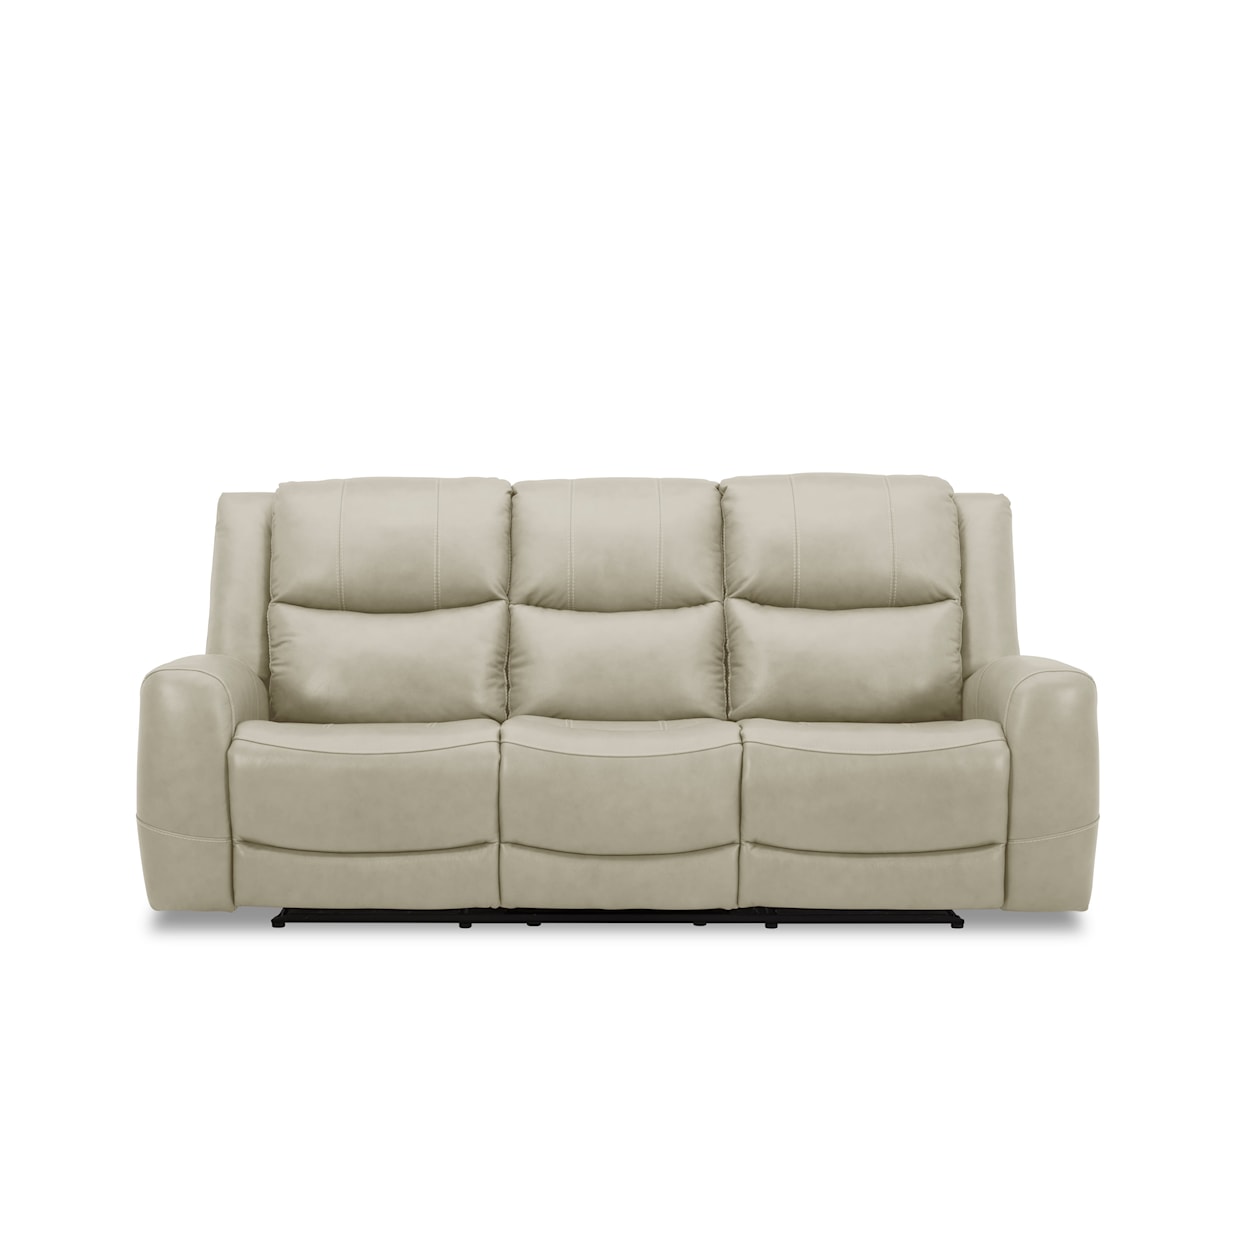 Kuka Home 6228 Leather Collection 6228 Argenta Leather Dual Power Sofa